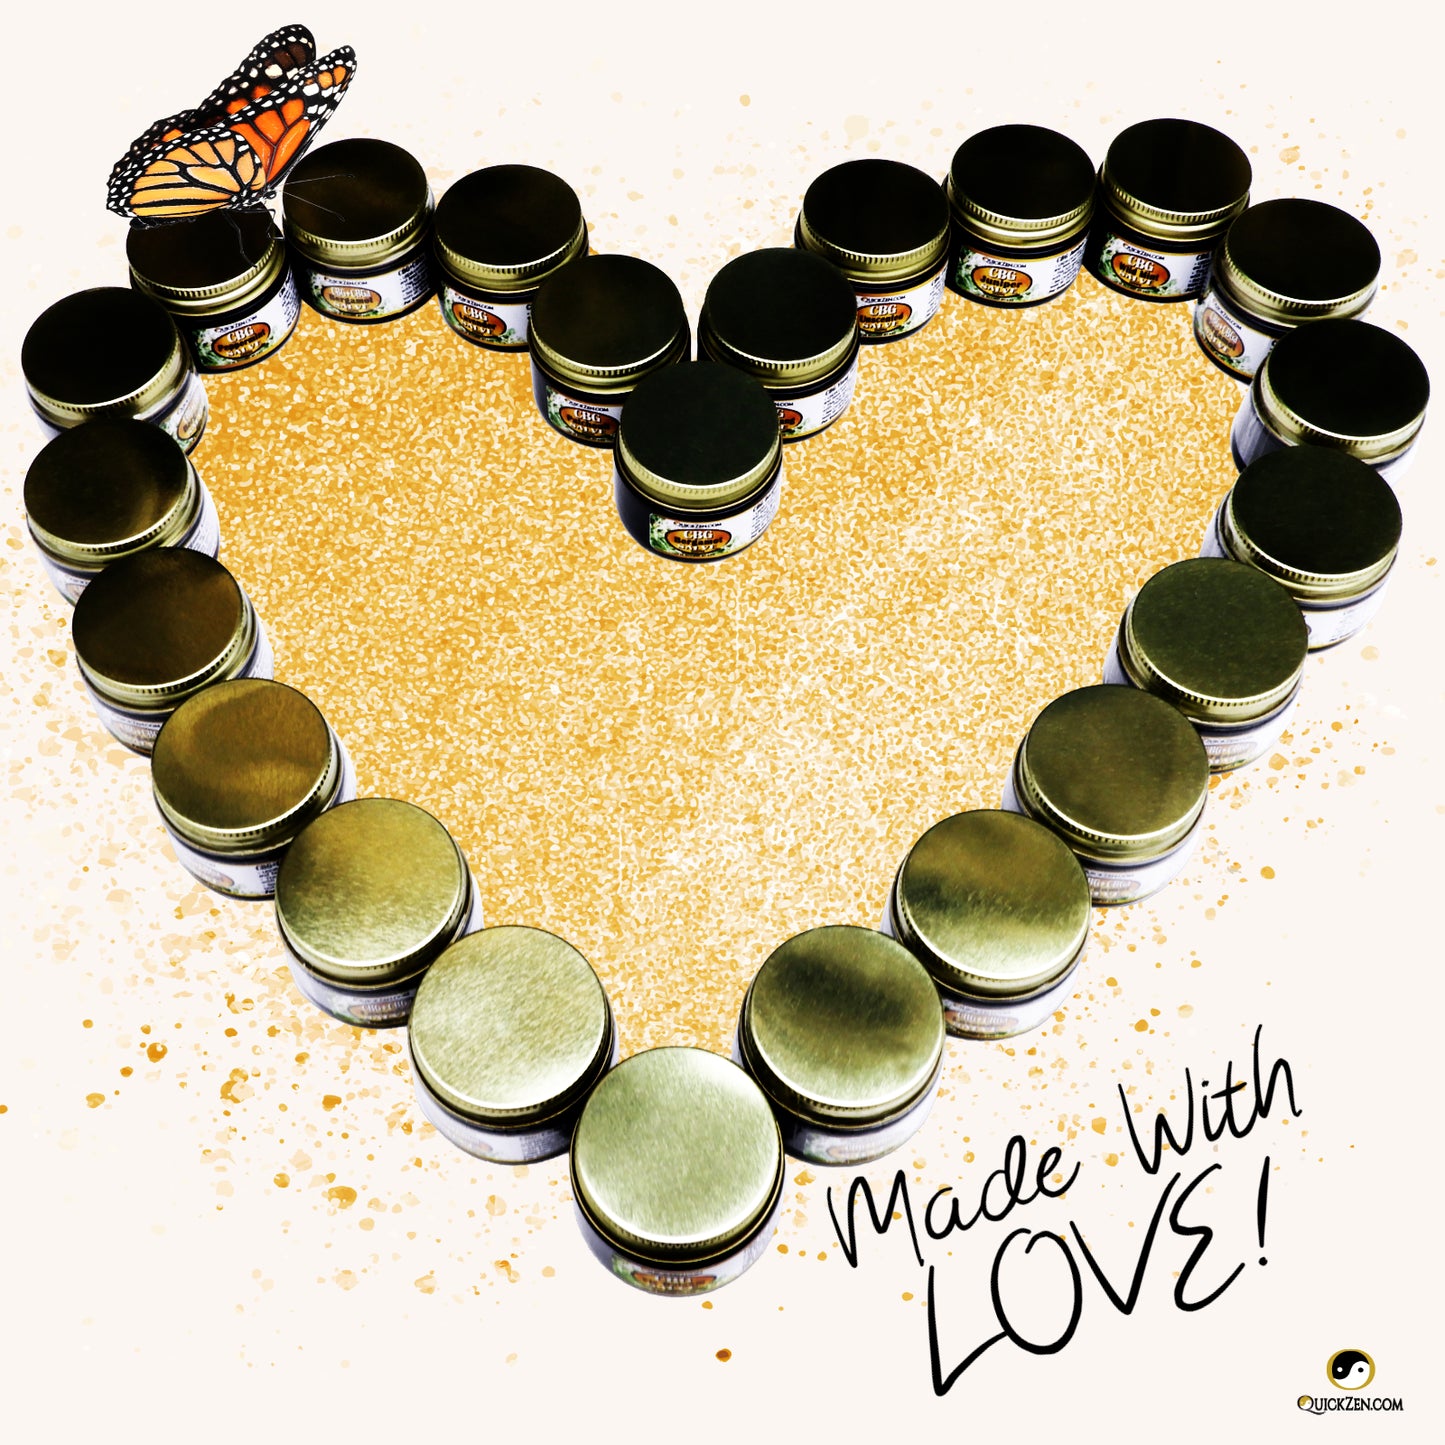 A heart shaped display of salve jars, on gold glitter. A monarch butterfly on one jar. Made with love, signed at the lower right corner.